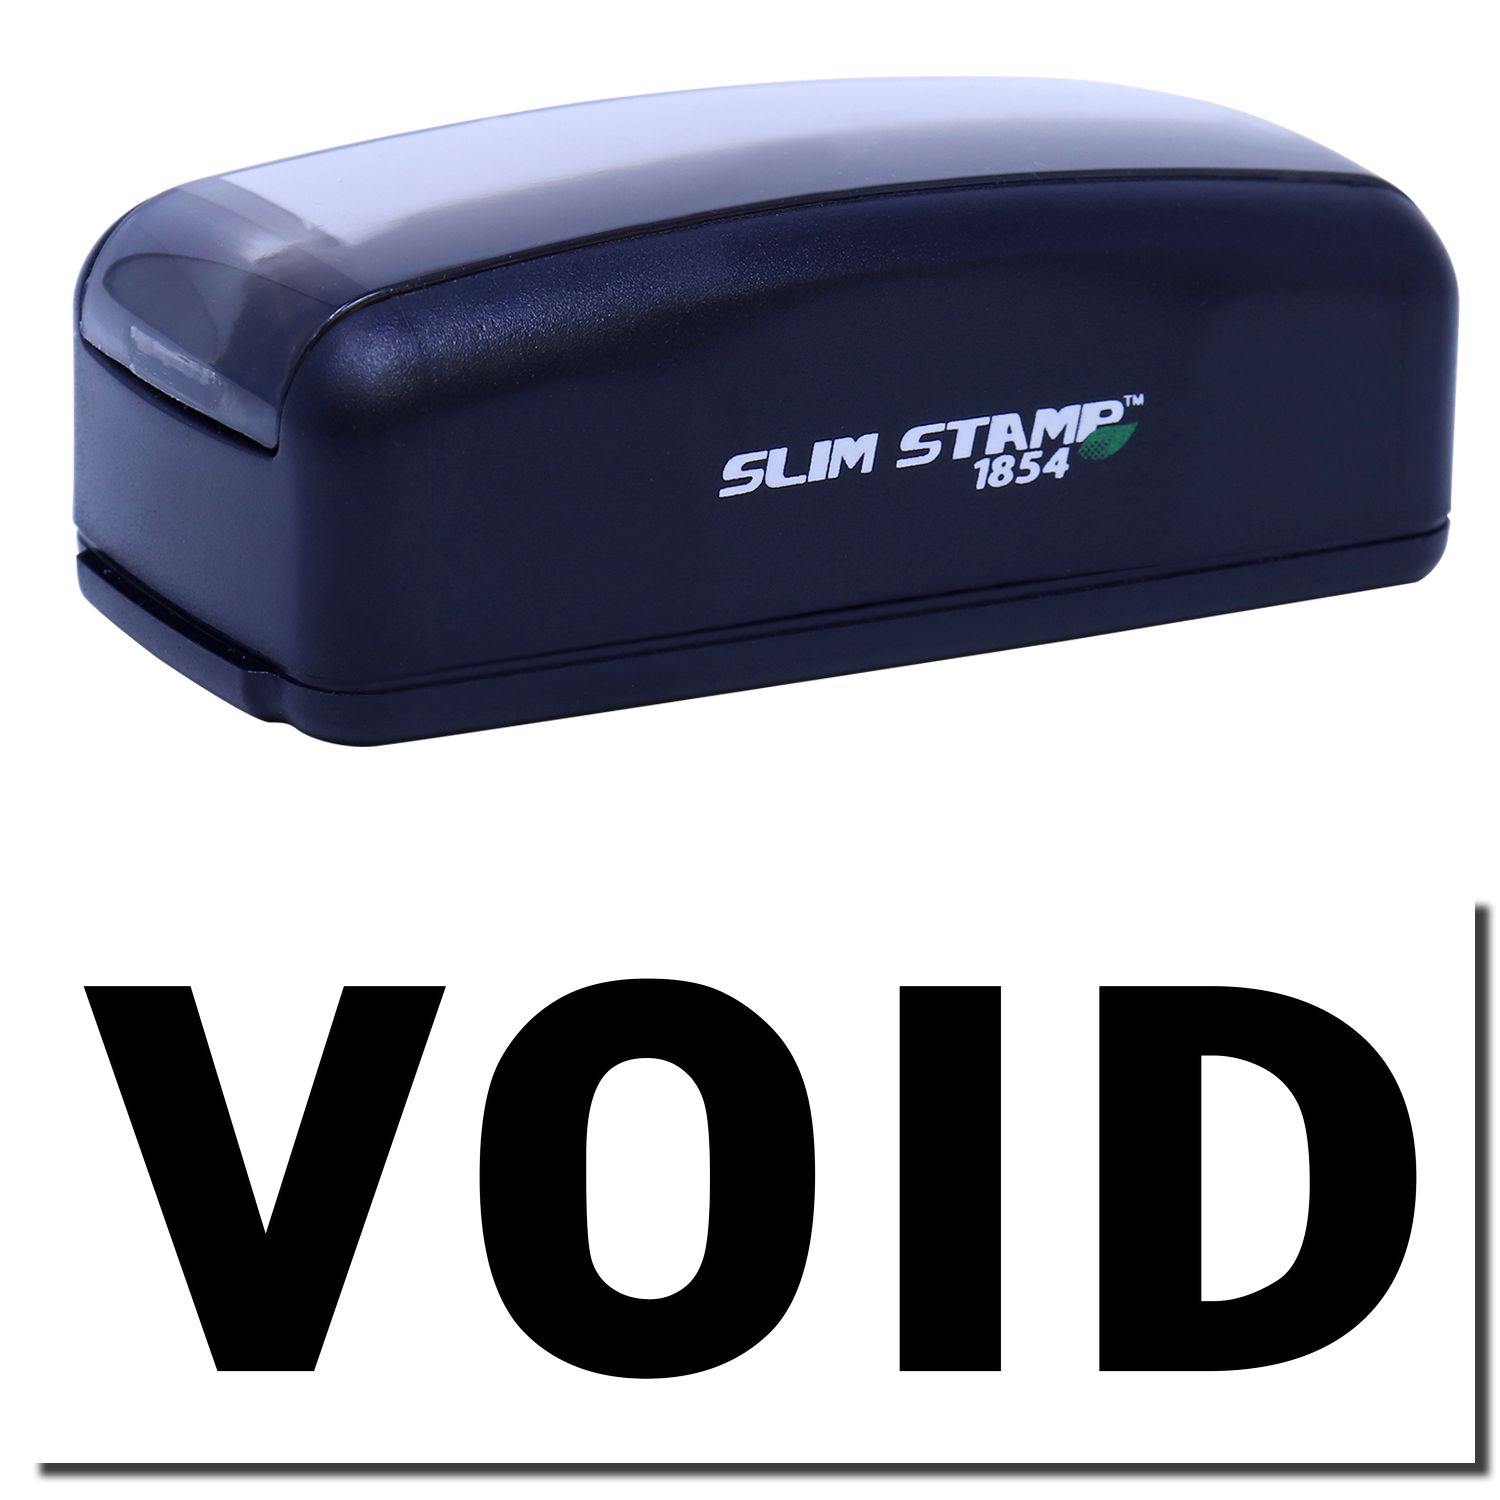 A stock office pre-inked stamp with a stamped image showing how the text "VOID" in a large font is displayed after stamping.